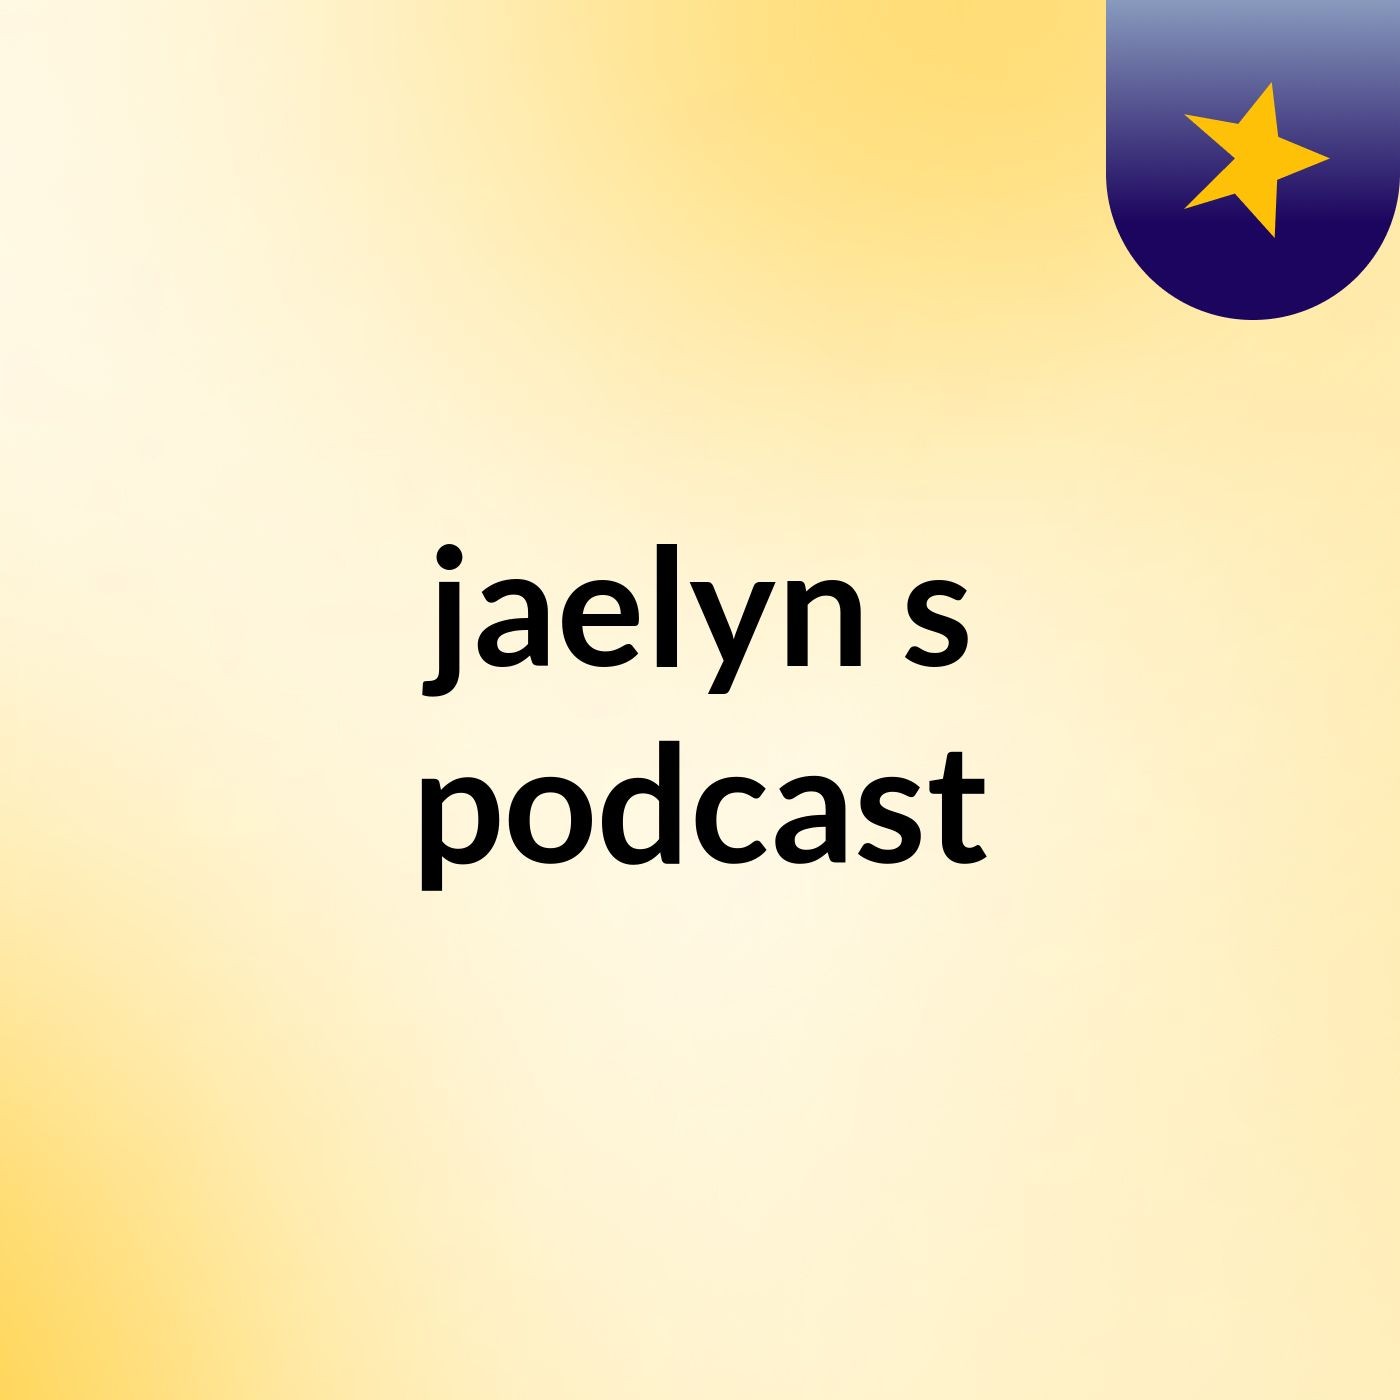 jaelyn's podcast